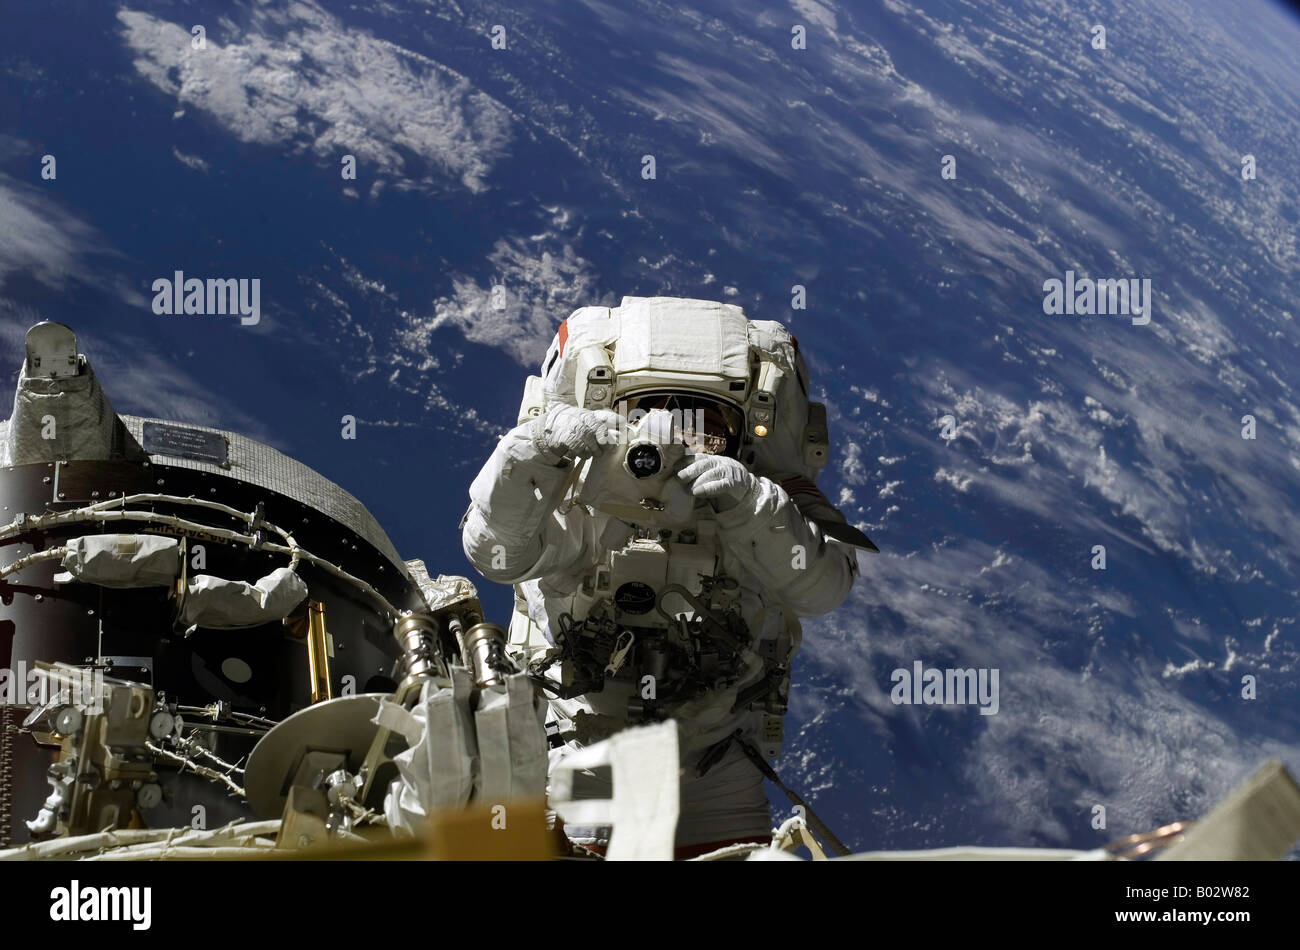 Astronaut participating in extravehicular activity. Stock Photo